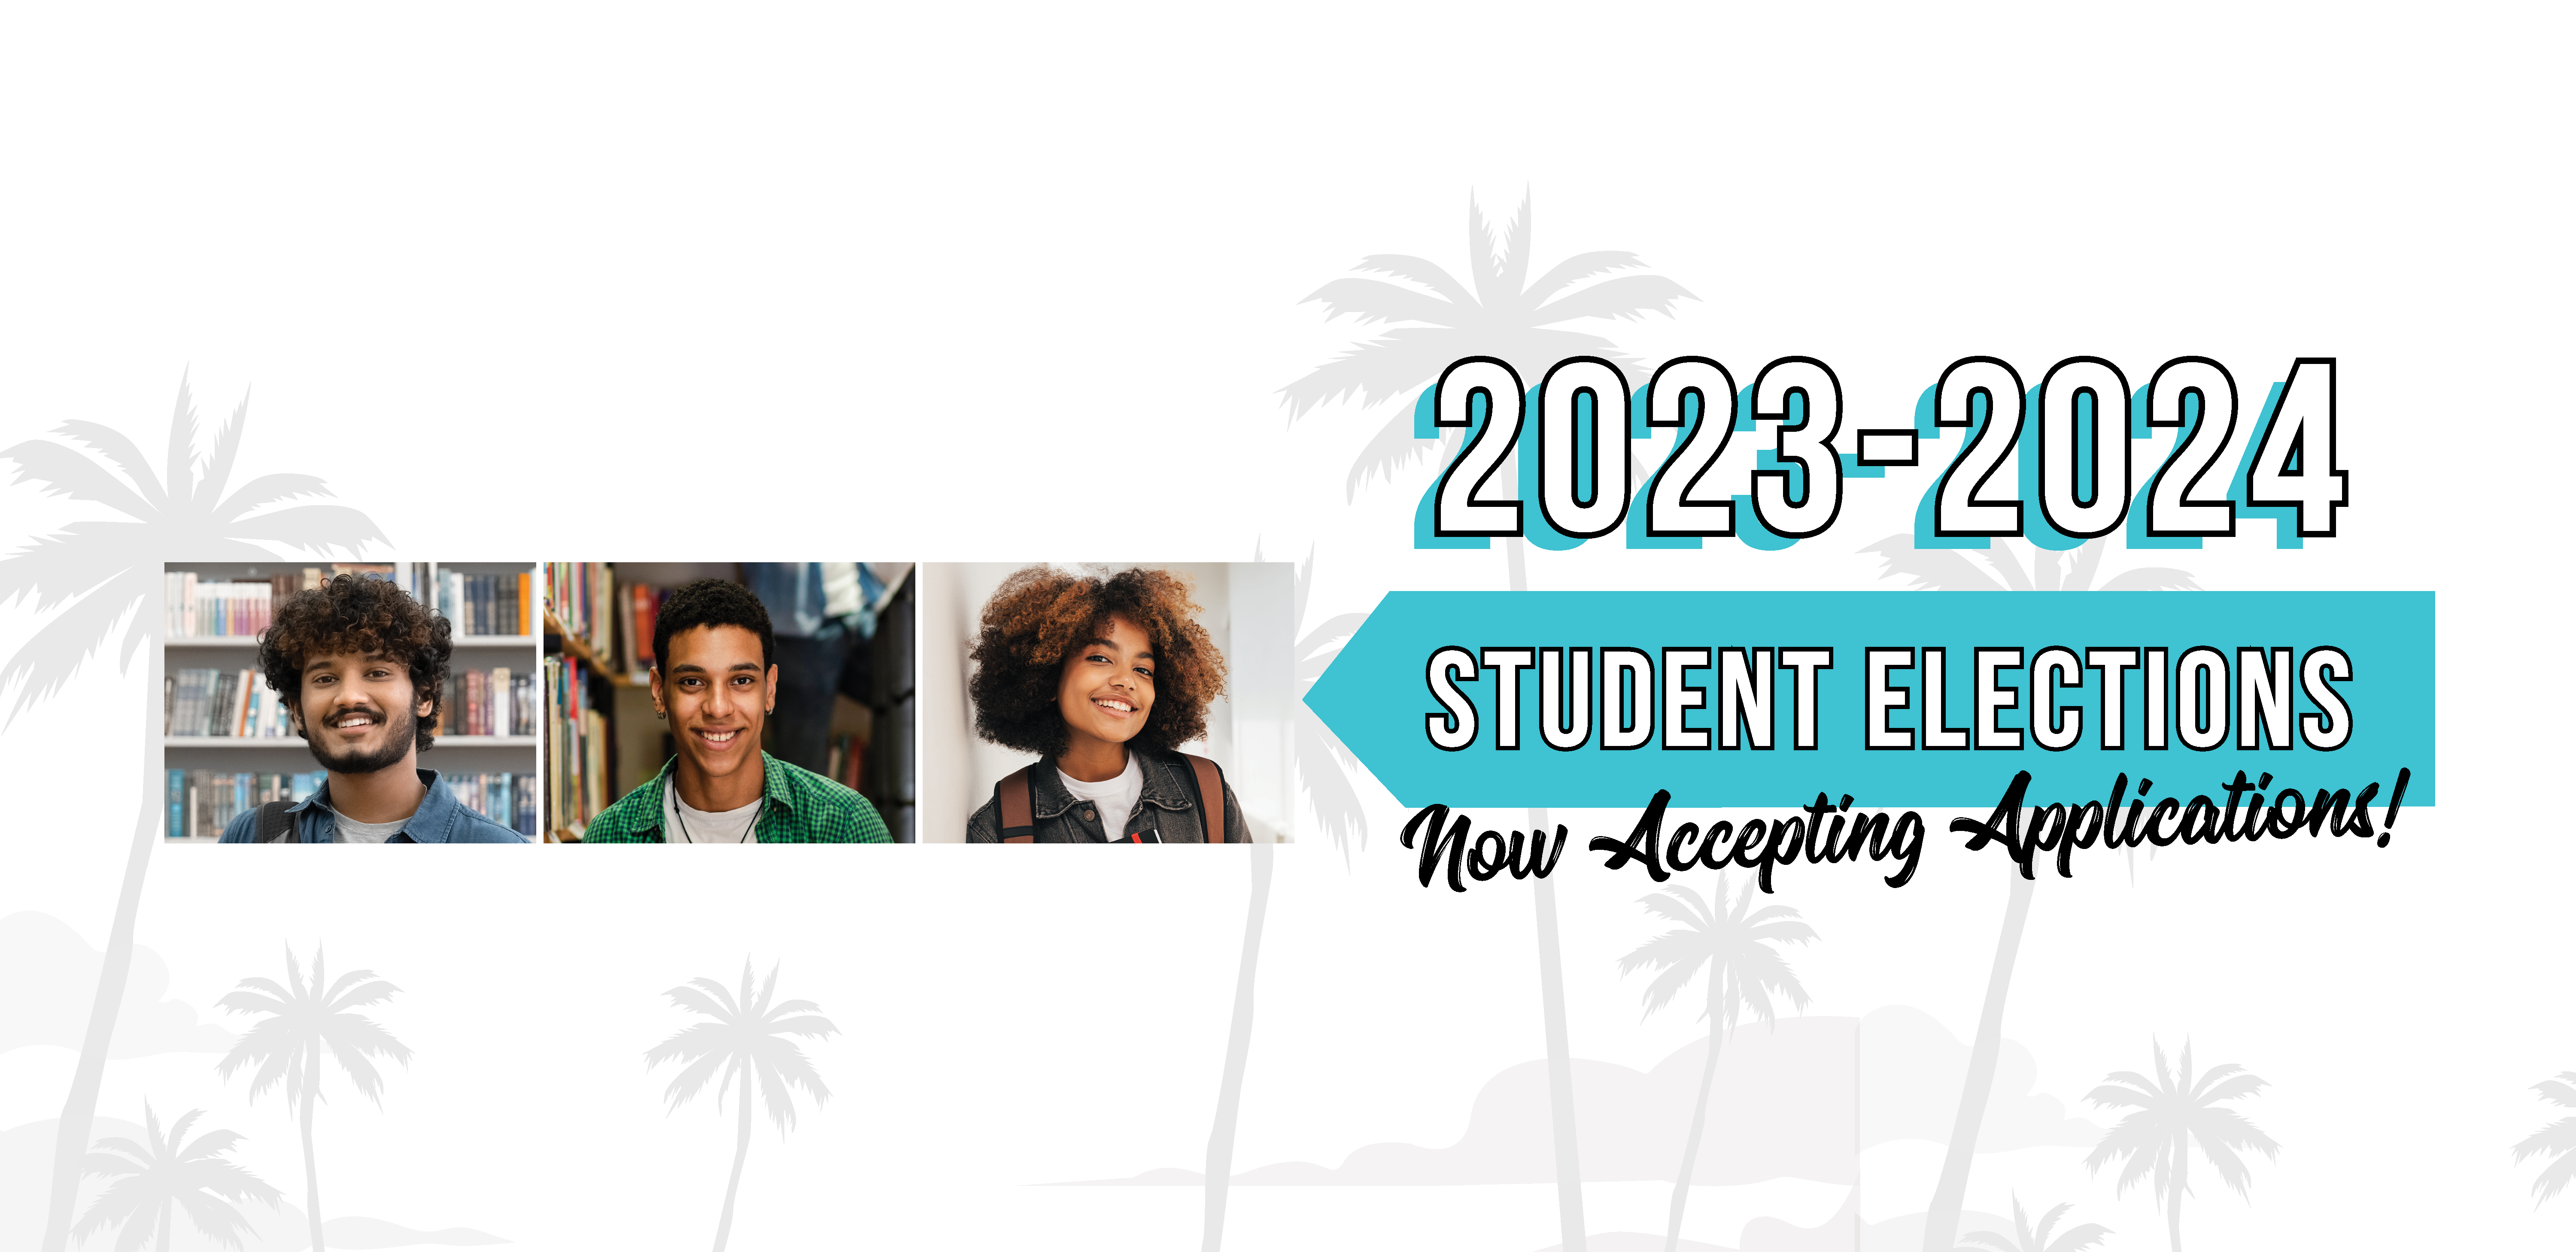 2023 - 2024 Student Elections. Now Accepting Applications!